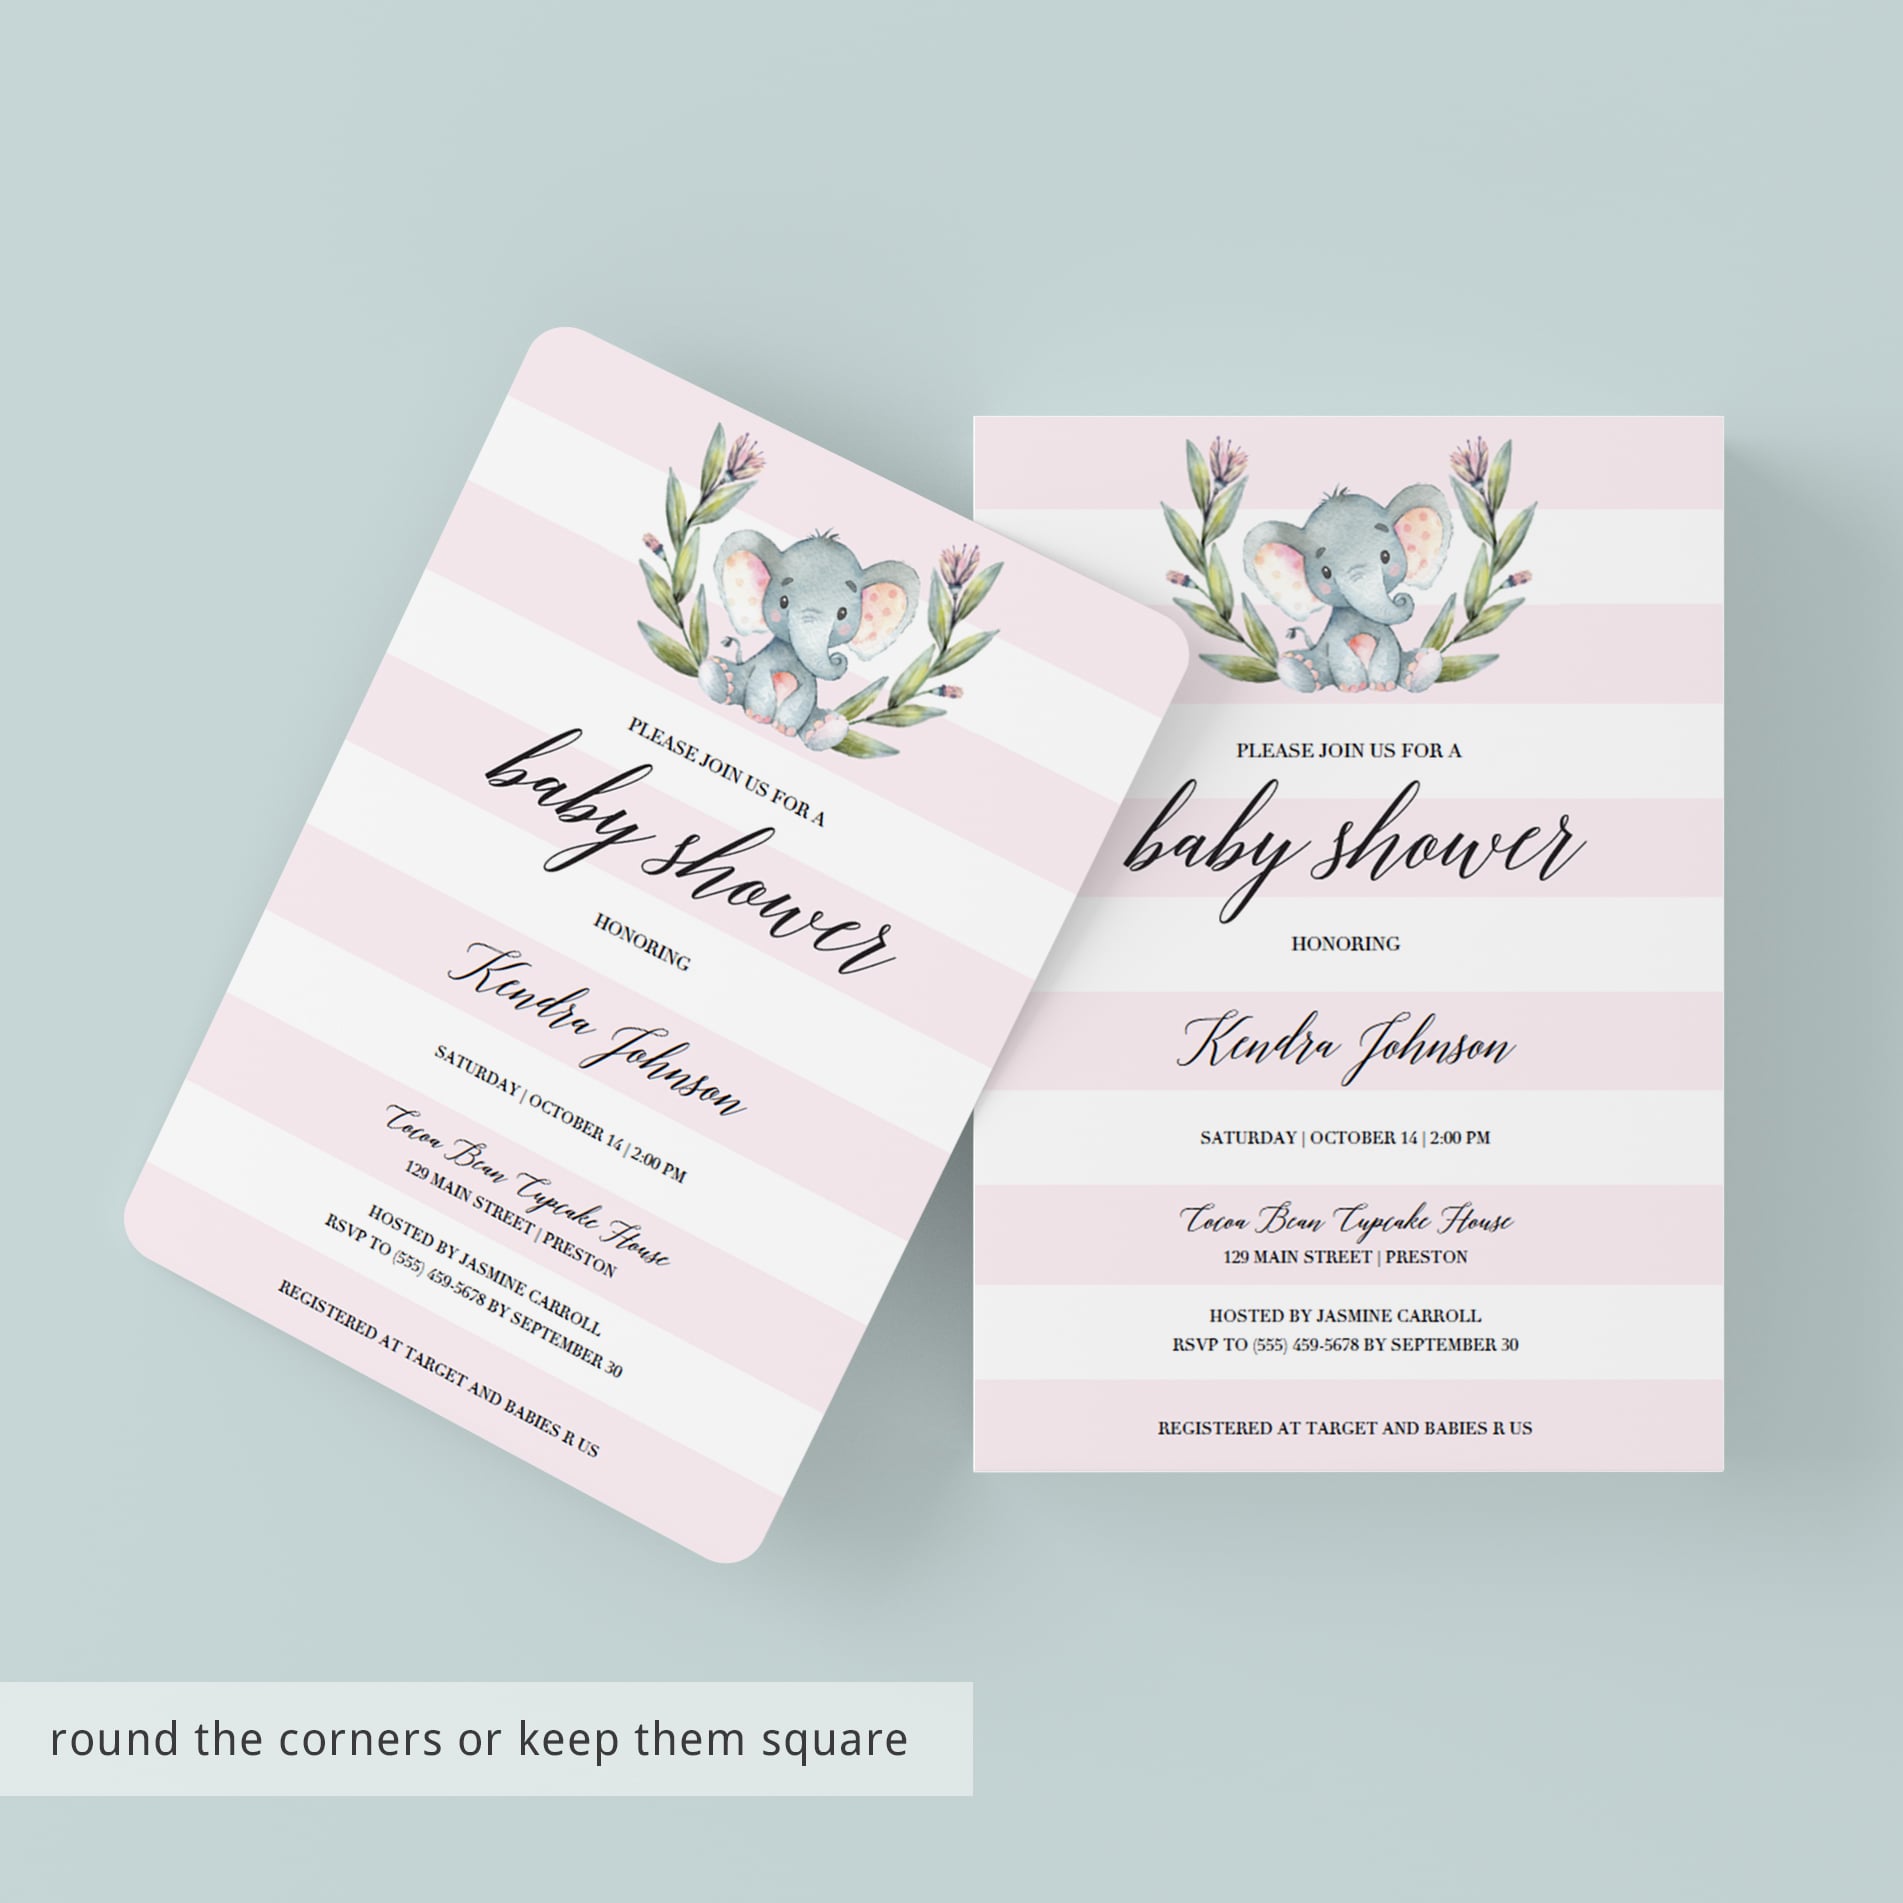 Pink elephant invitation template for girl baby shower by LittleSizzle